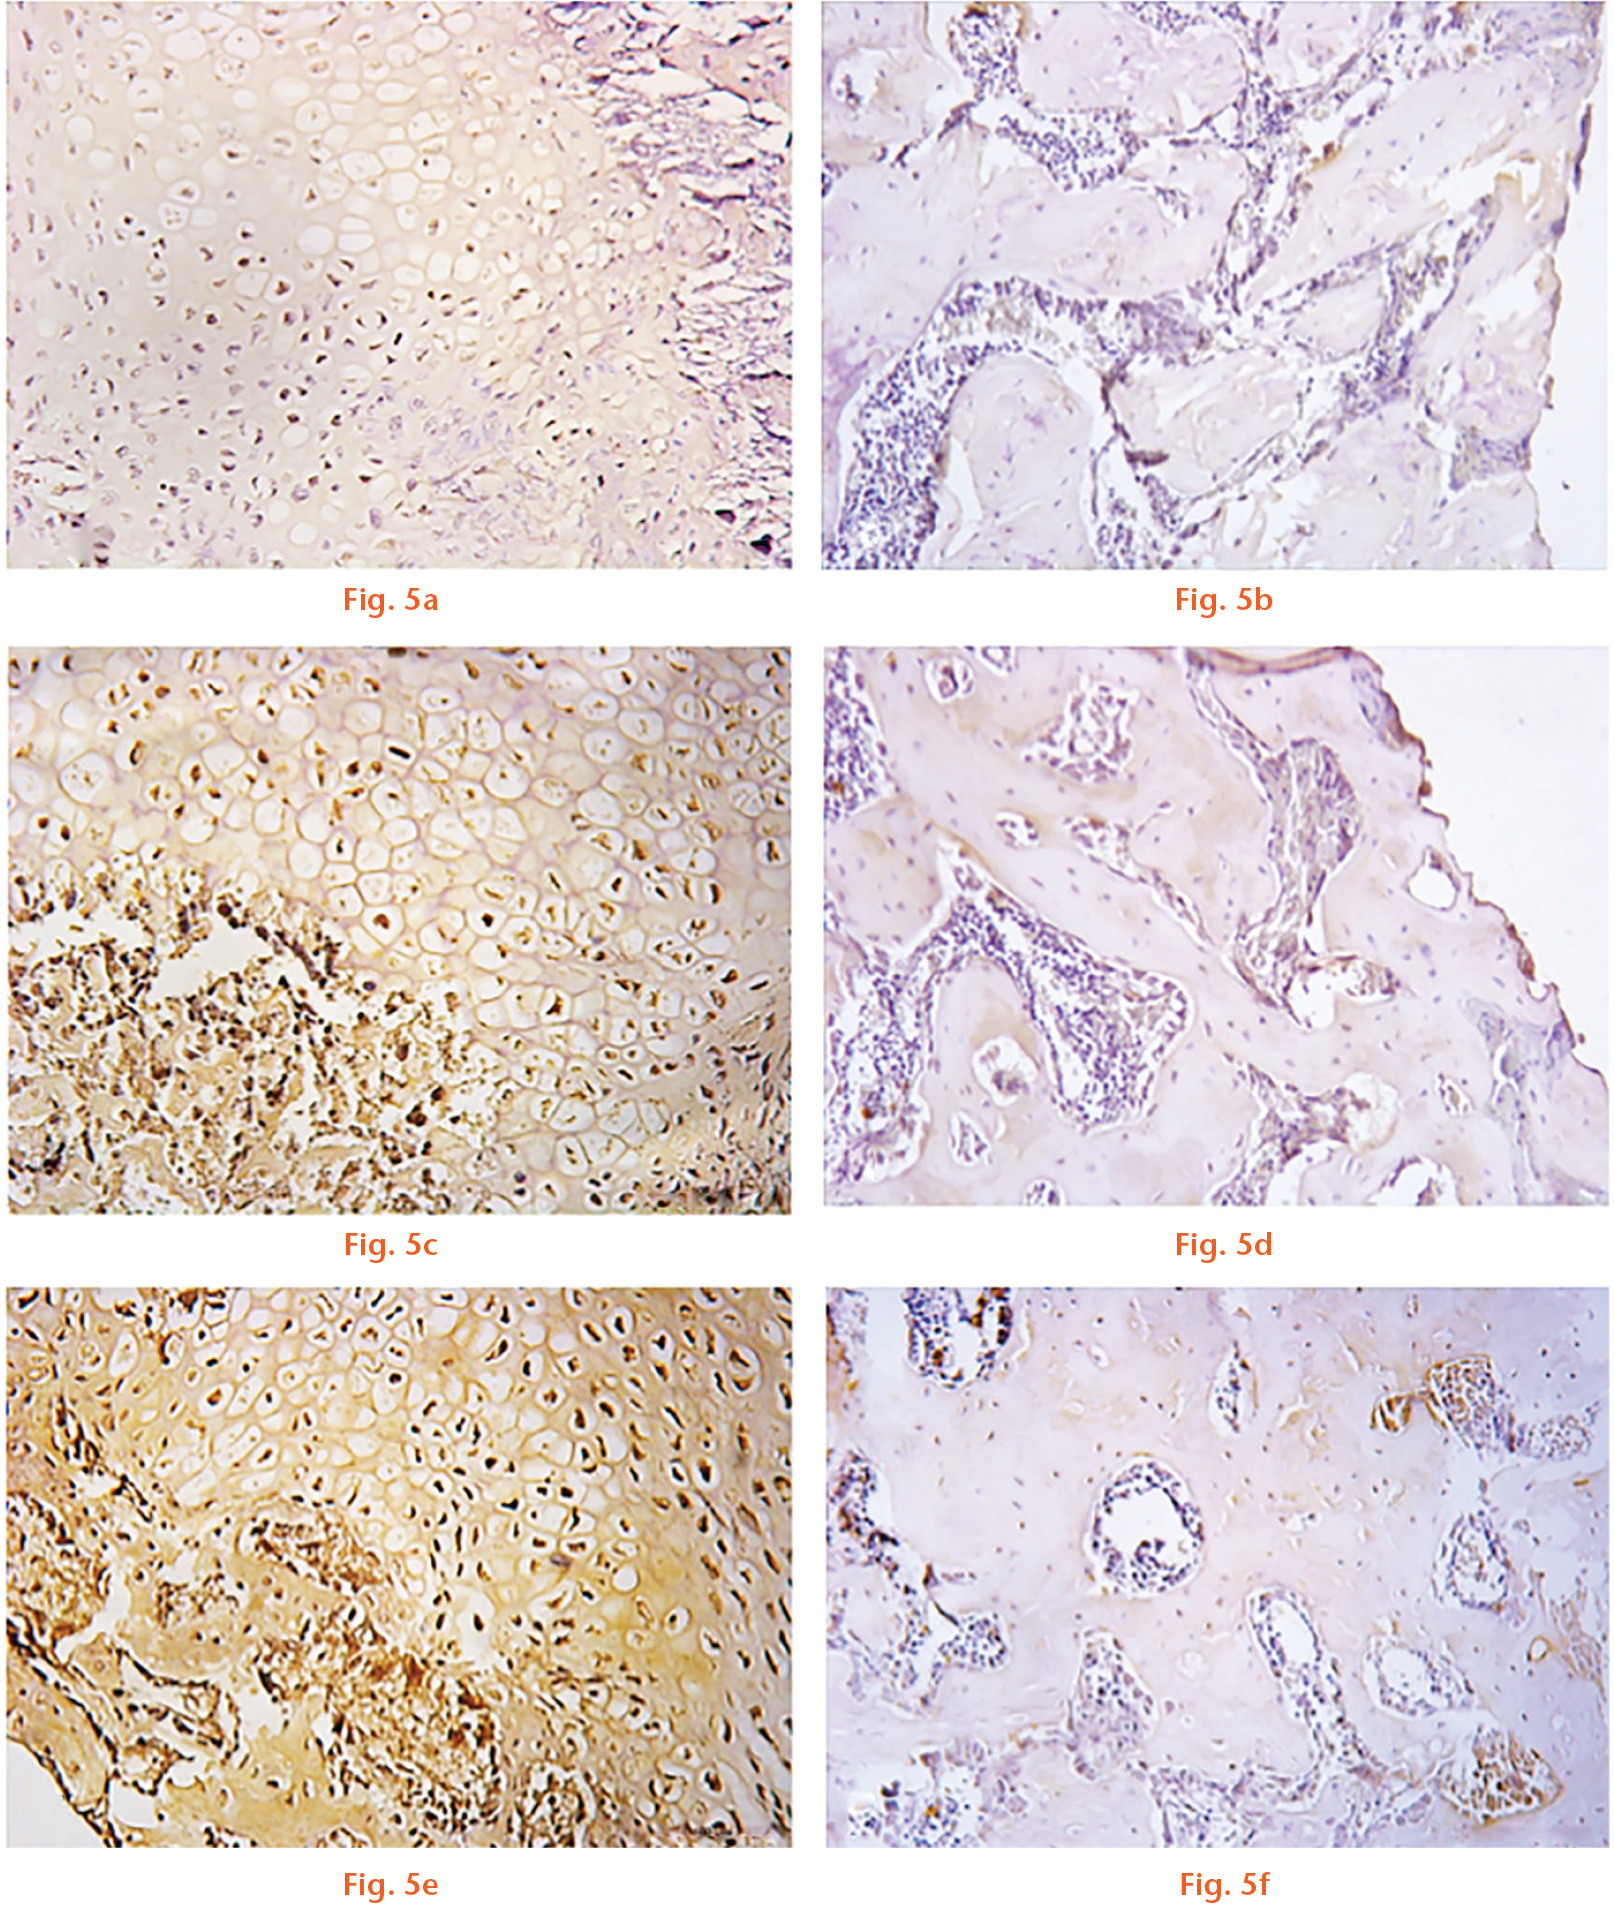  
            Effect of tadalafil and COMB-4 on inducible nitric oxide synthase (iNOS) expression at day 14 and day 42 after femoral osteotomy determined by immunohistochemistry. Microphotographs of iNOS expression taken at the osteotomy site: a) and b) are control; c) and d) are tadalafil; e) and f) are COMB-4. Panels (a), (c) and (e) depict 14-day results and panels (b), (d) and (f) depict 42-day results.
          